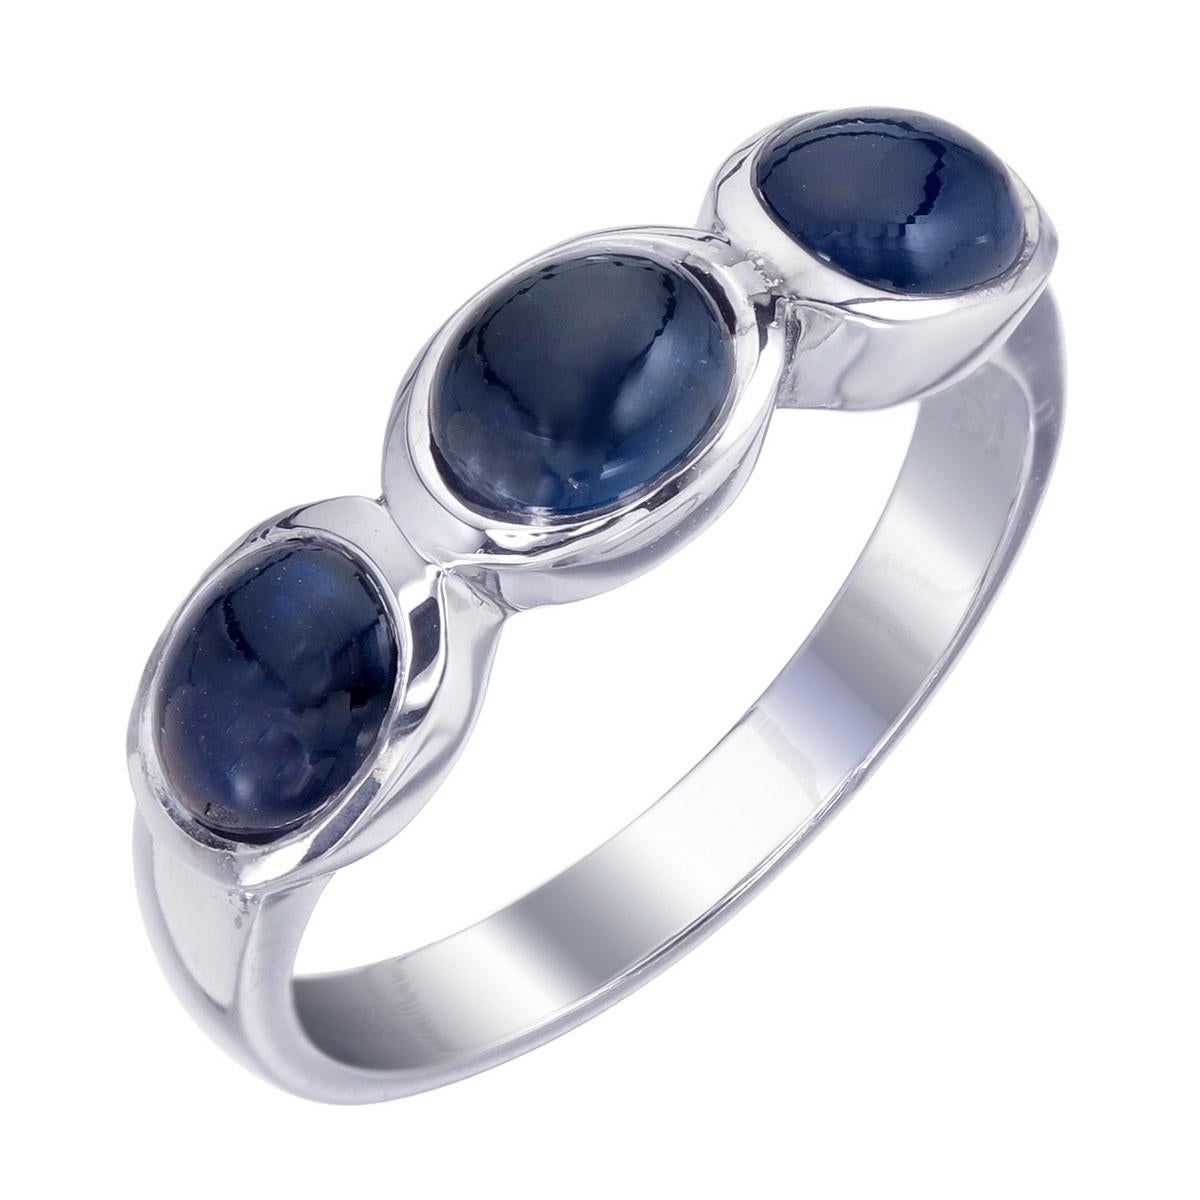 Orloff of Denmark; Triple-Stone Blue Sapphire Sterling Silver Ring.

This ring is adorned with three stunning blue cabochon sapphires elegantly set in a row. This exquisite piece combines classic design with timeless beauty, making it the perfect